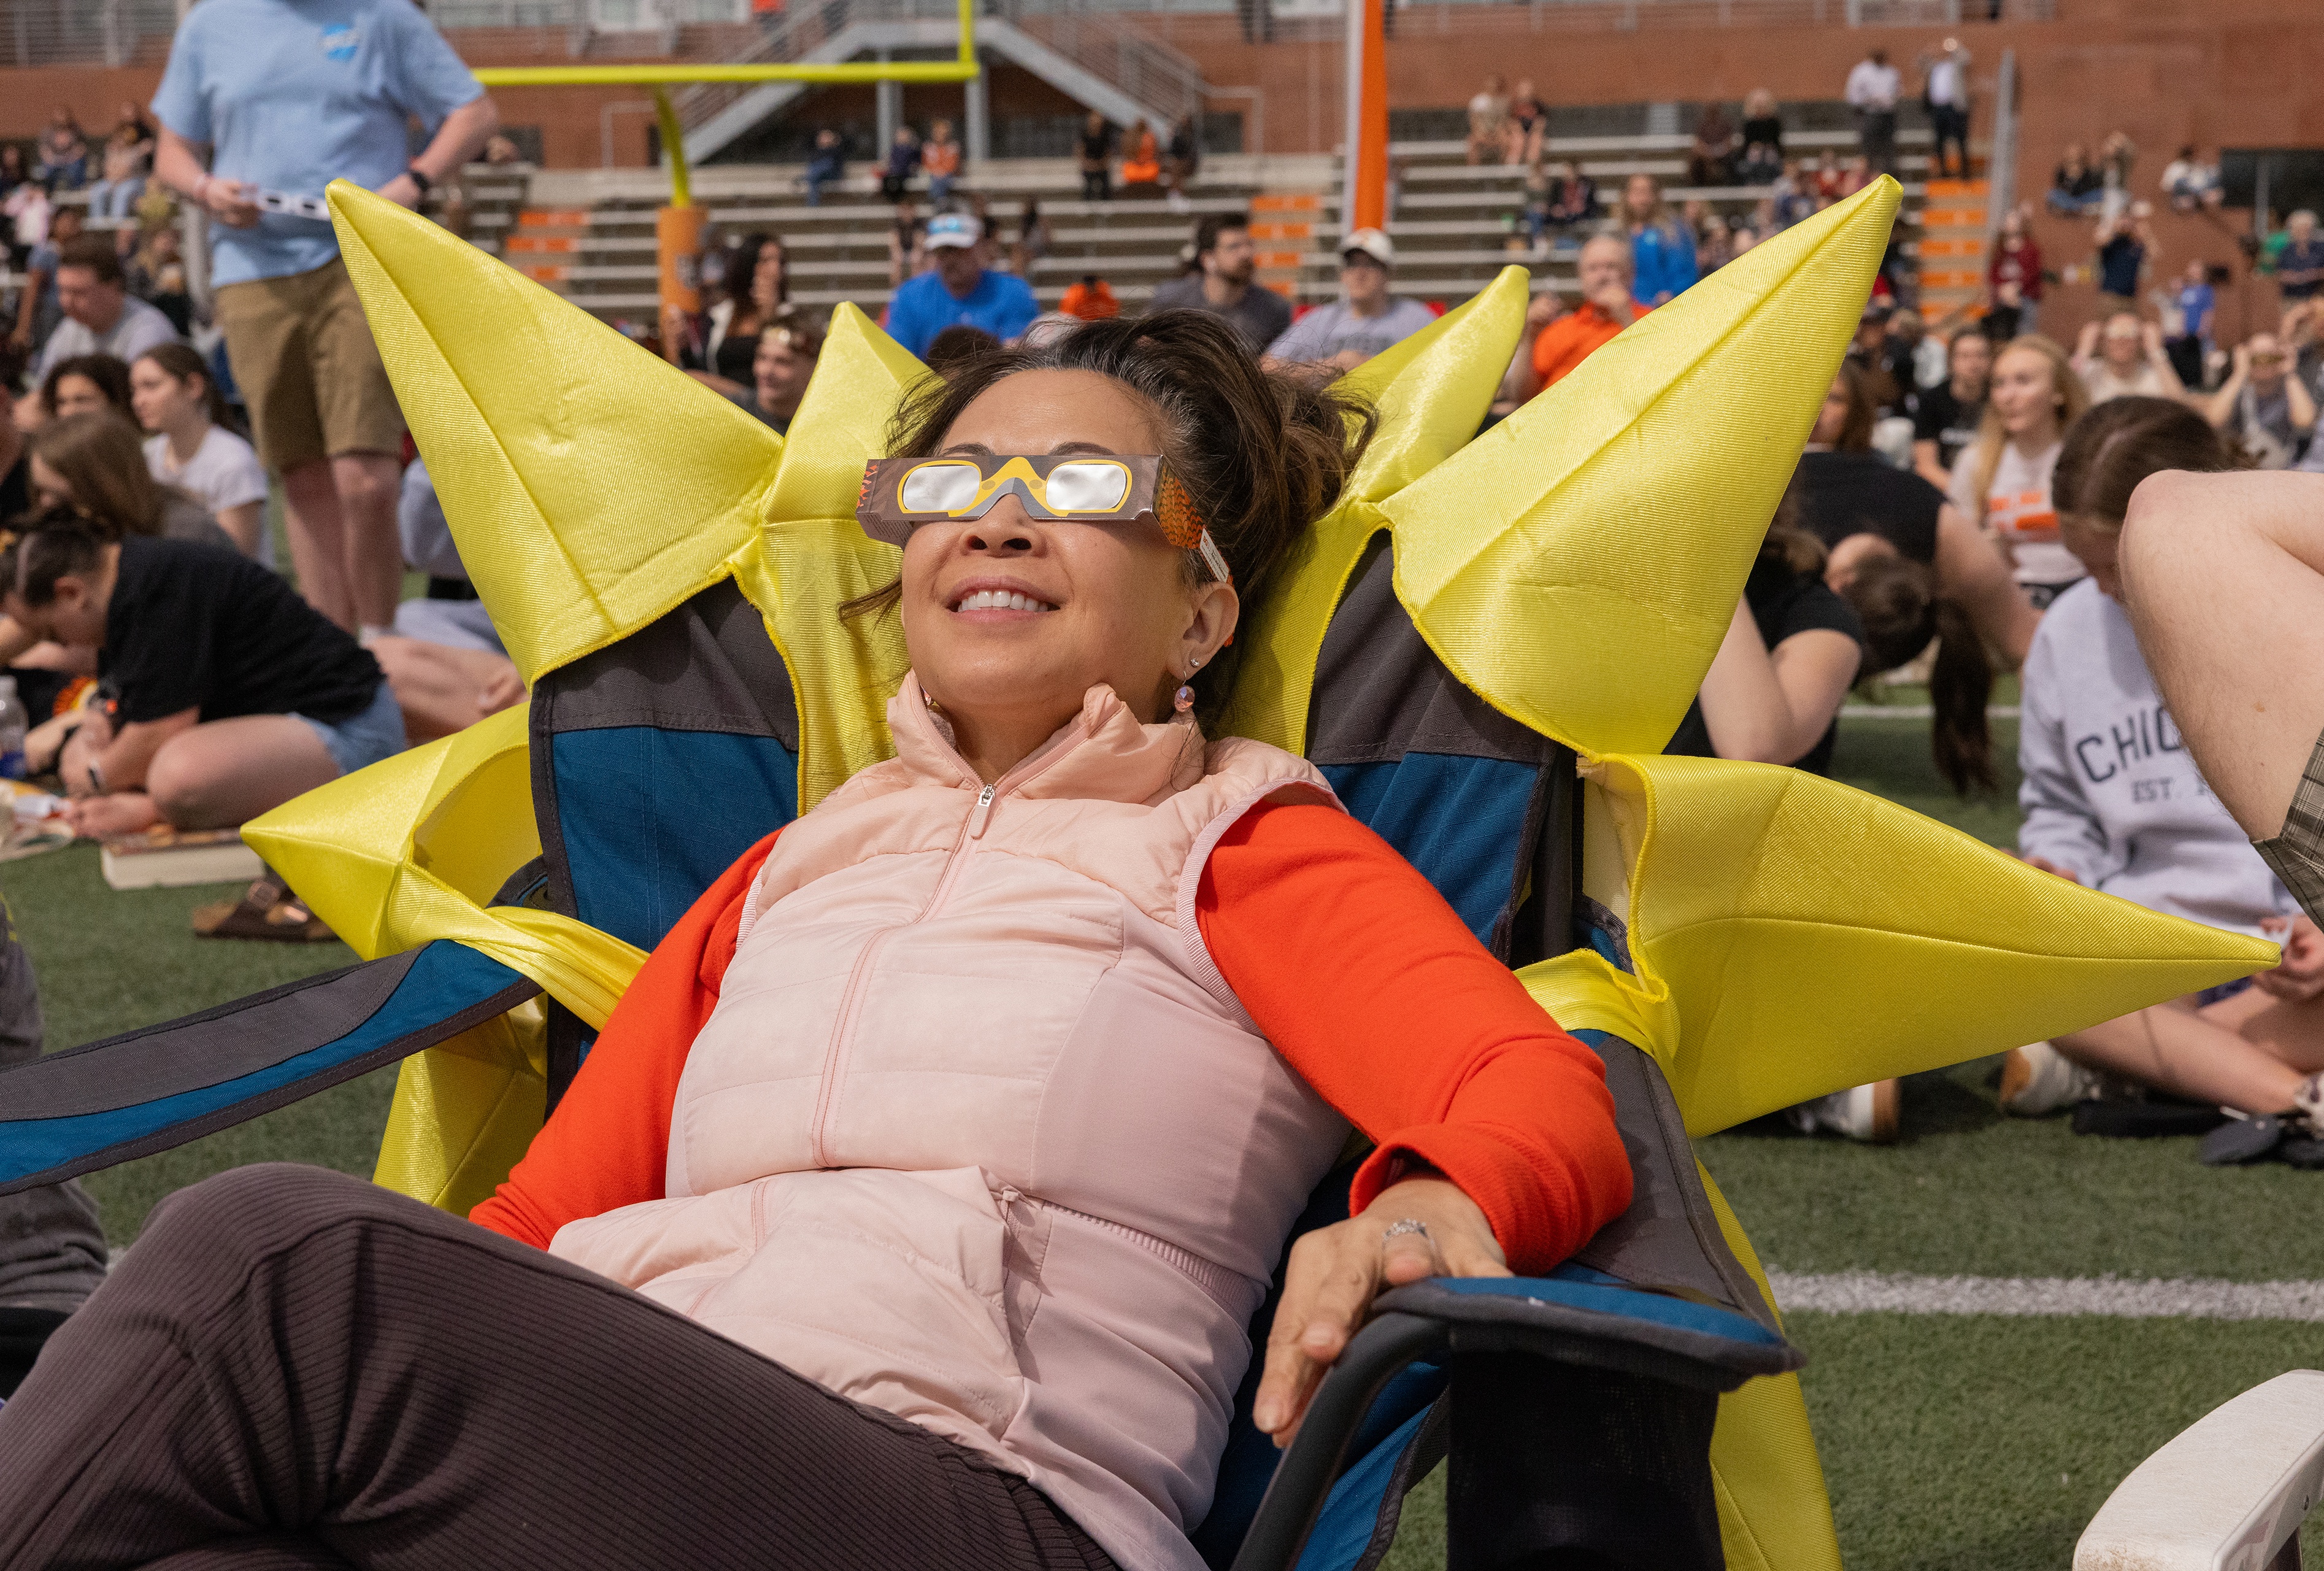 A visitor lounges in a "sun chair" on the field. 